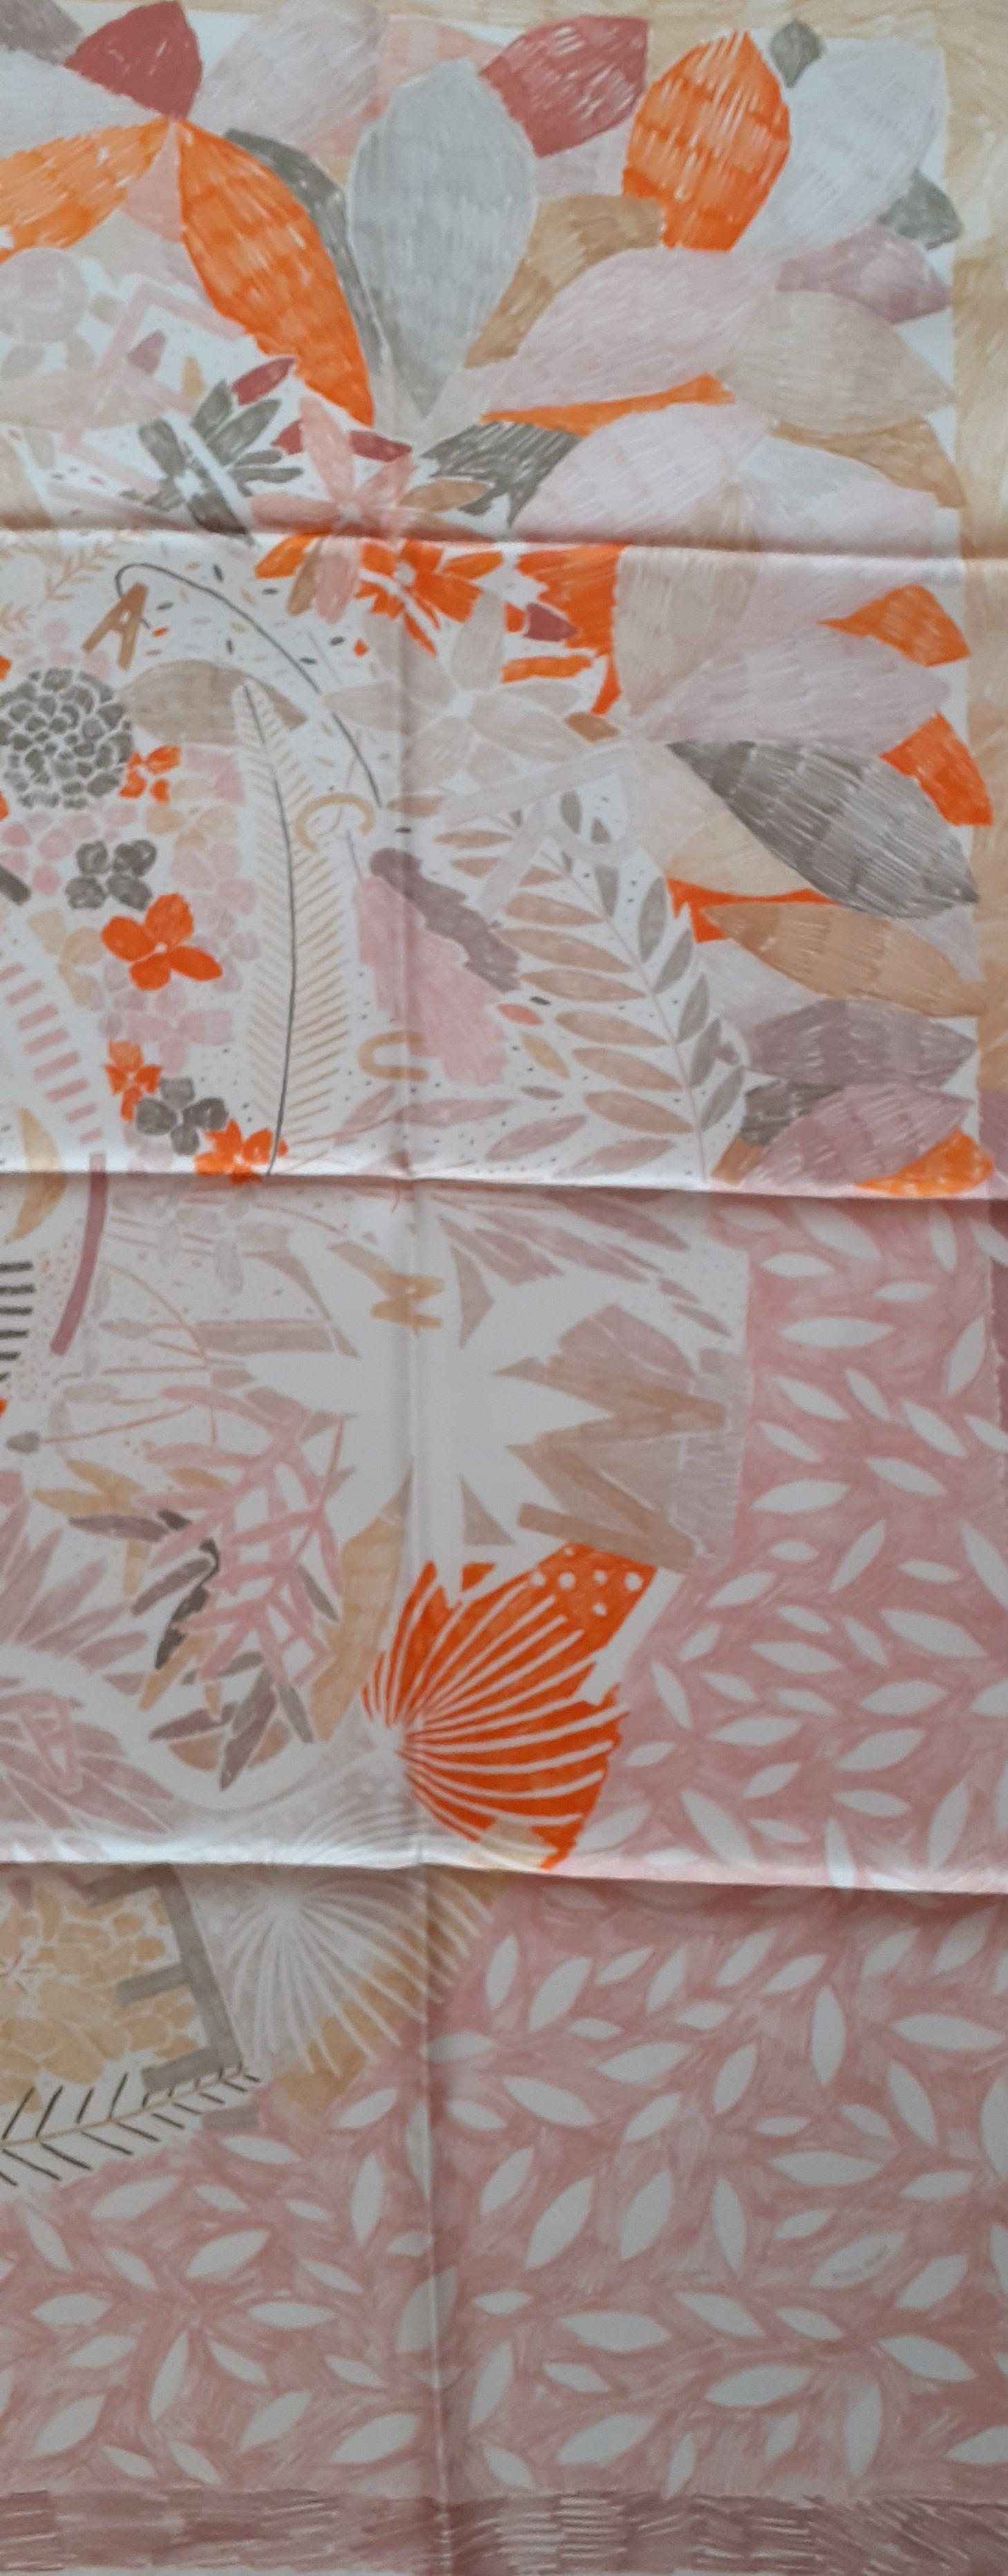 Absolutely Gorgeous Authentic Hermès Scarf

Pattern: 